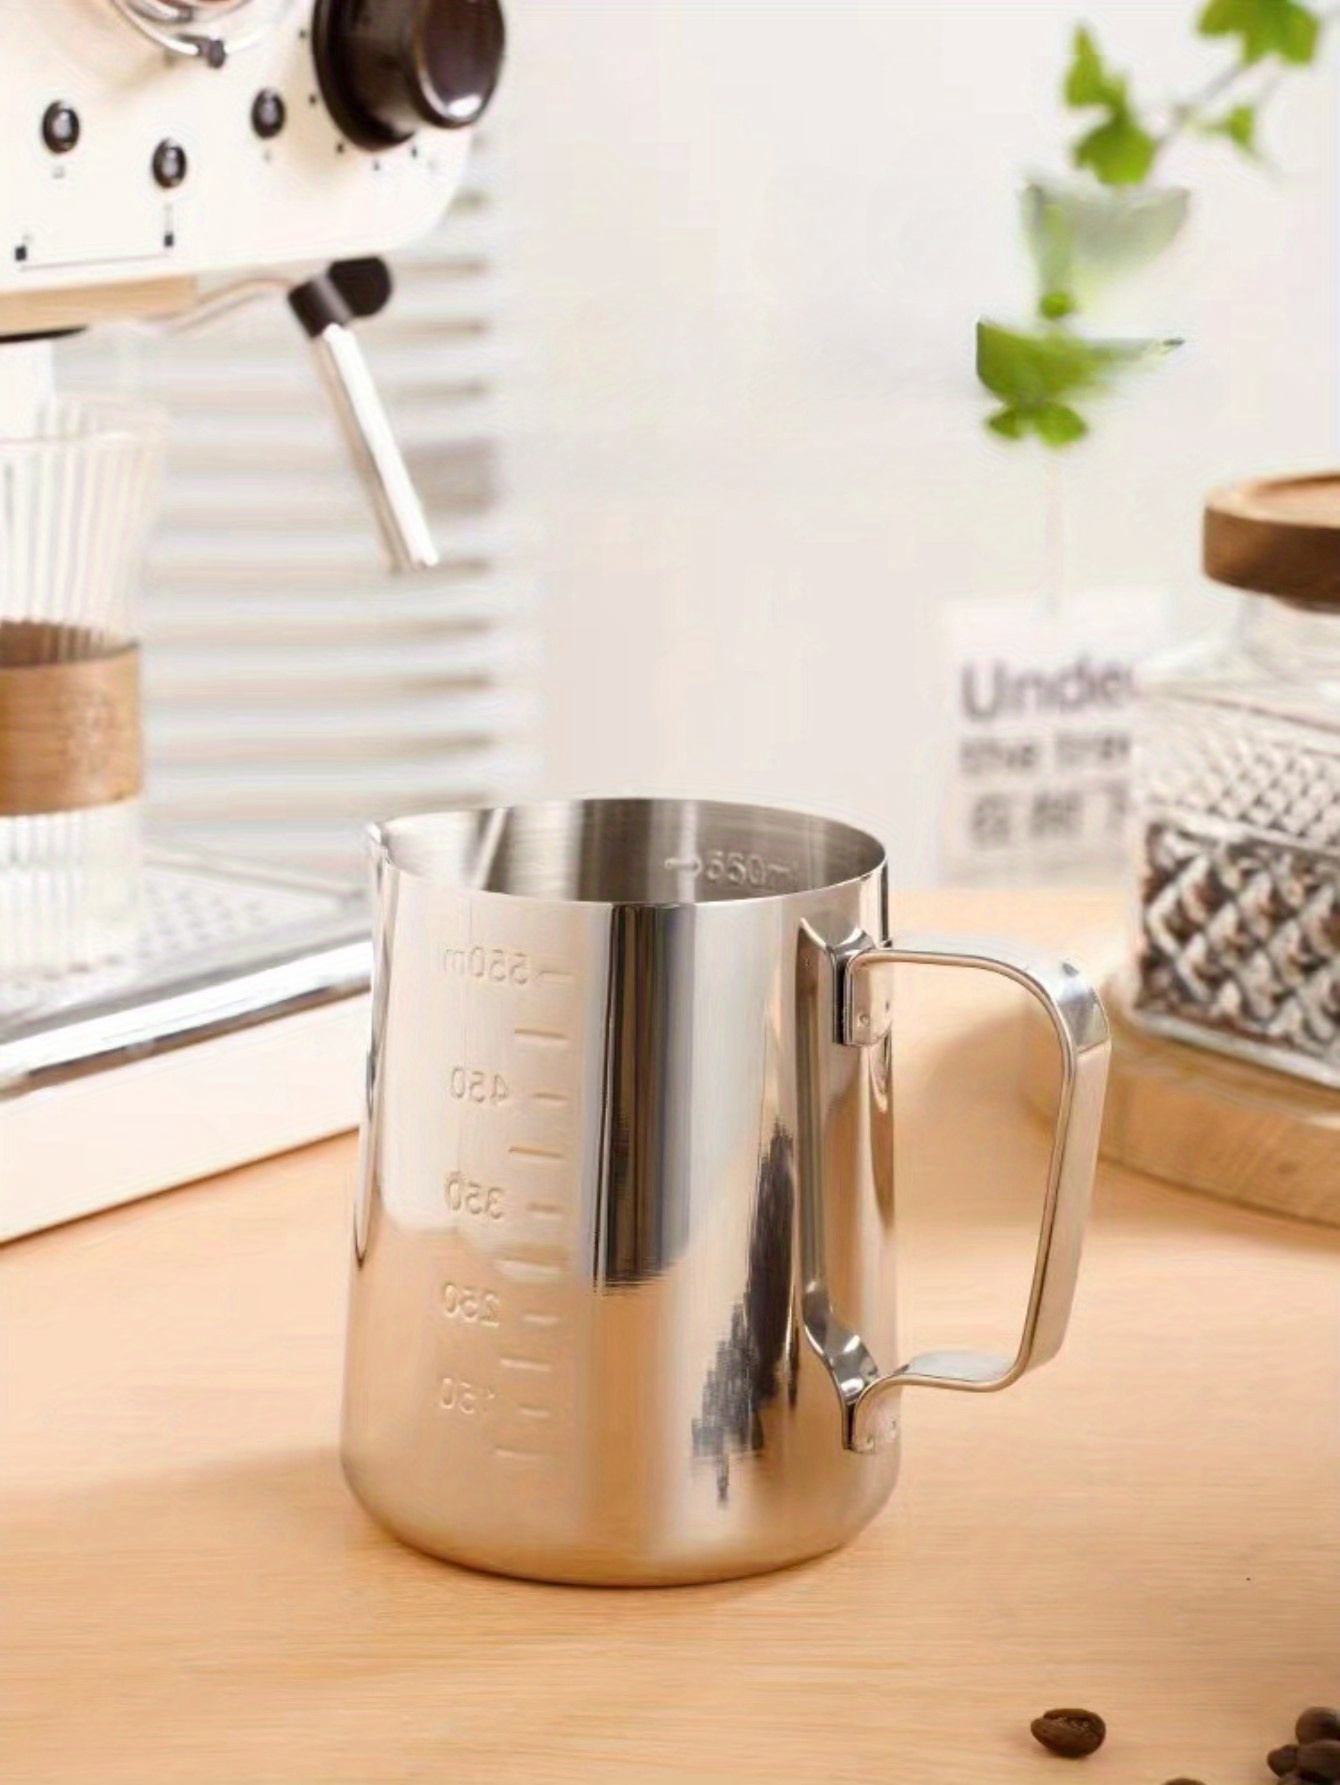 Milk Frothing Pitcher Jug & Frother Cup with Art Pen, Stainless